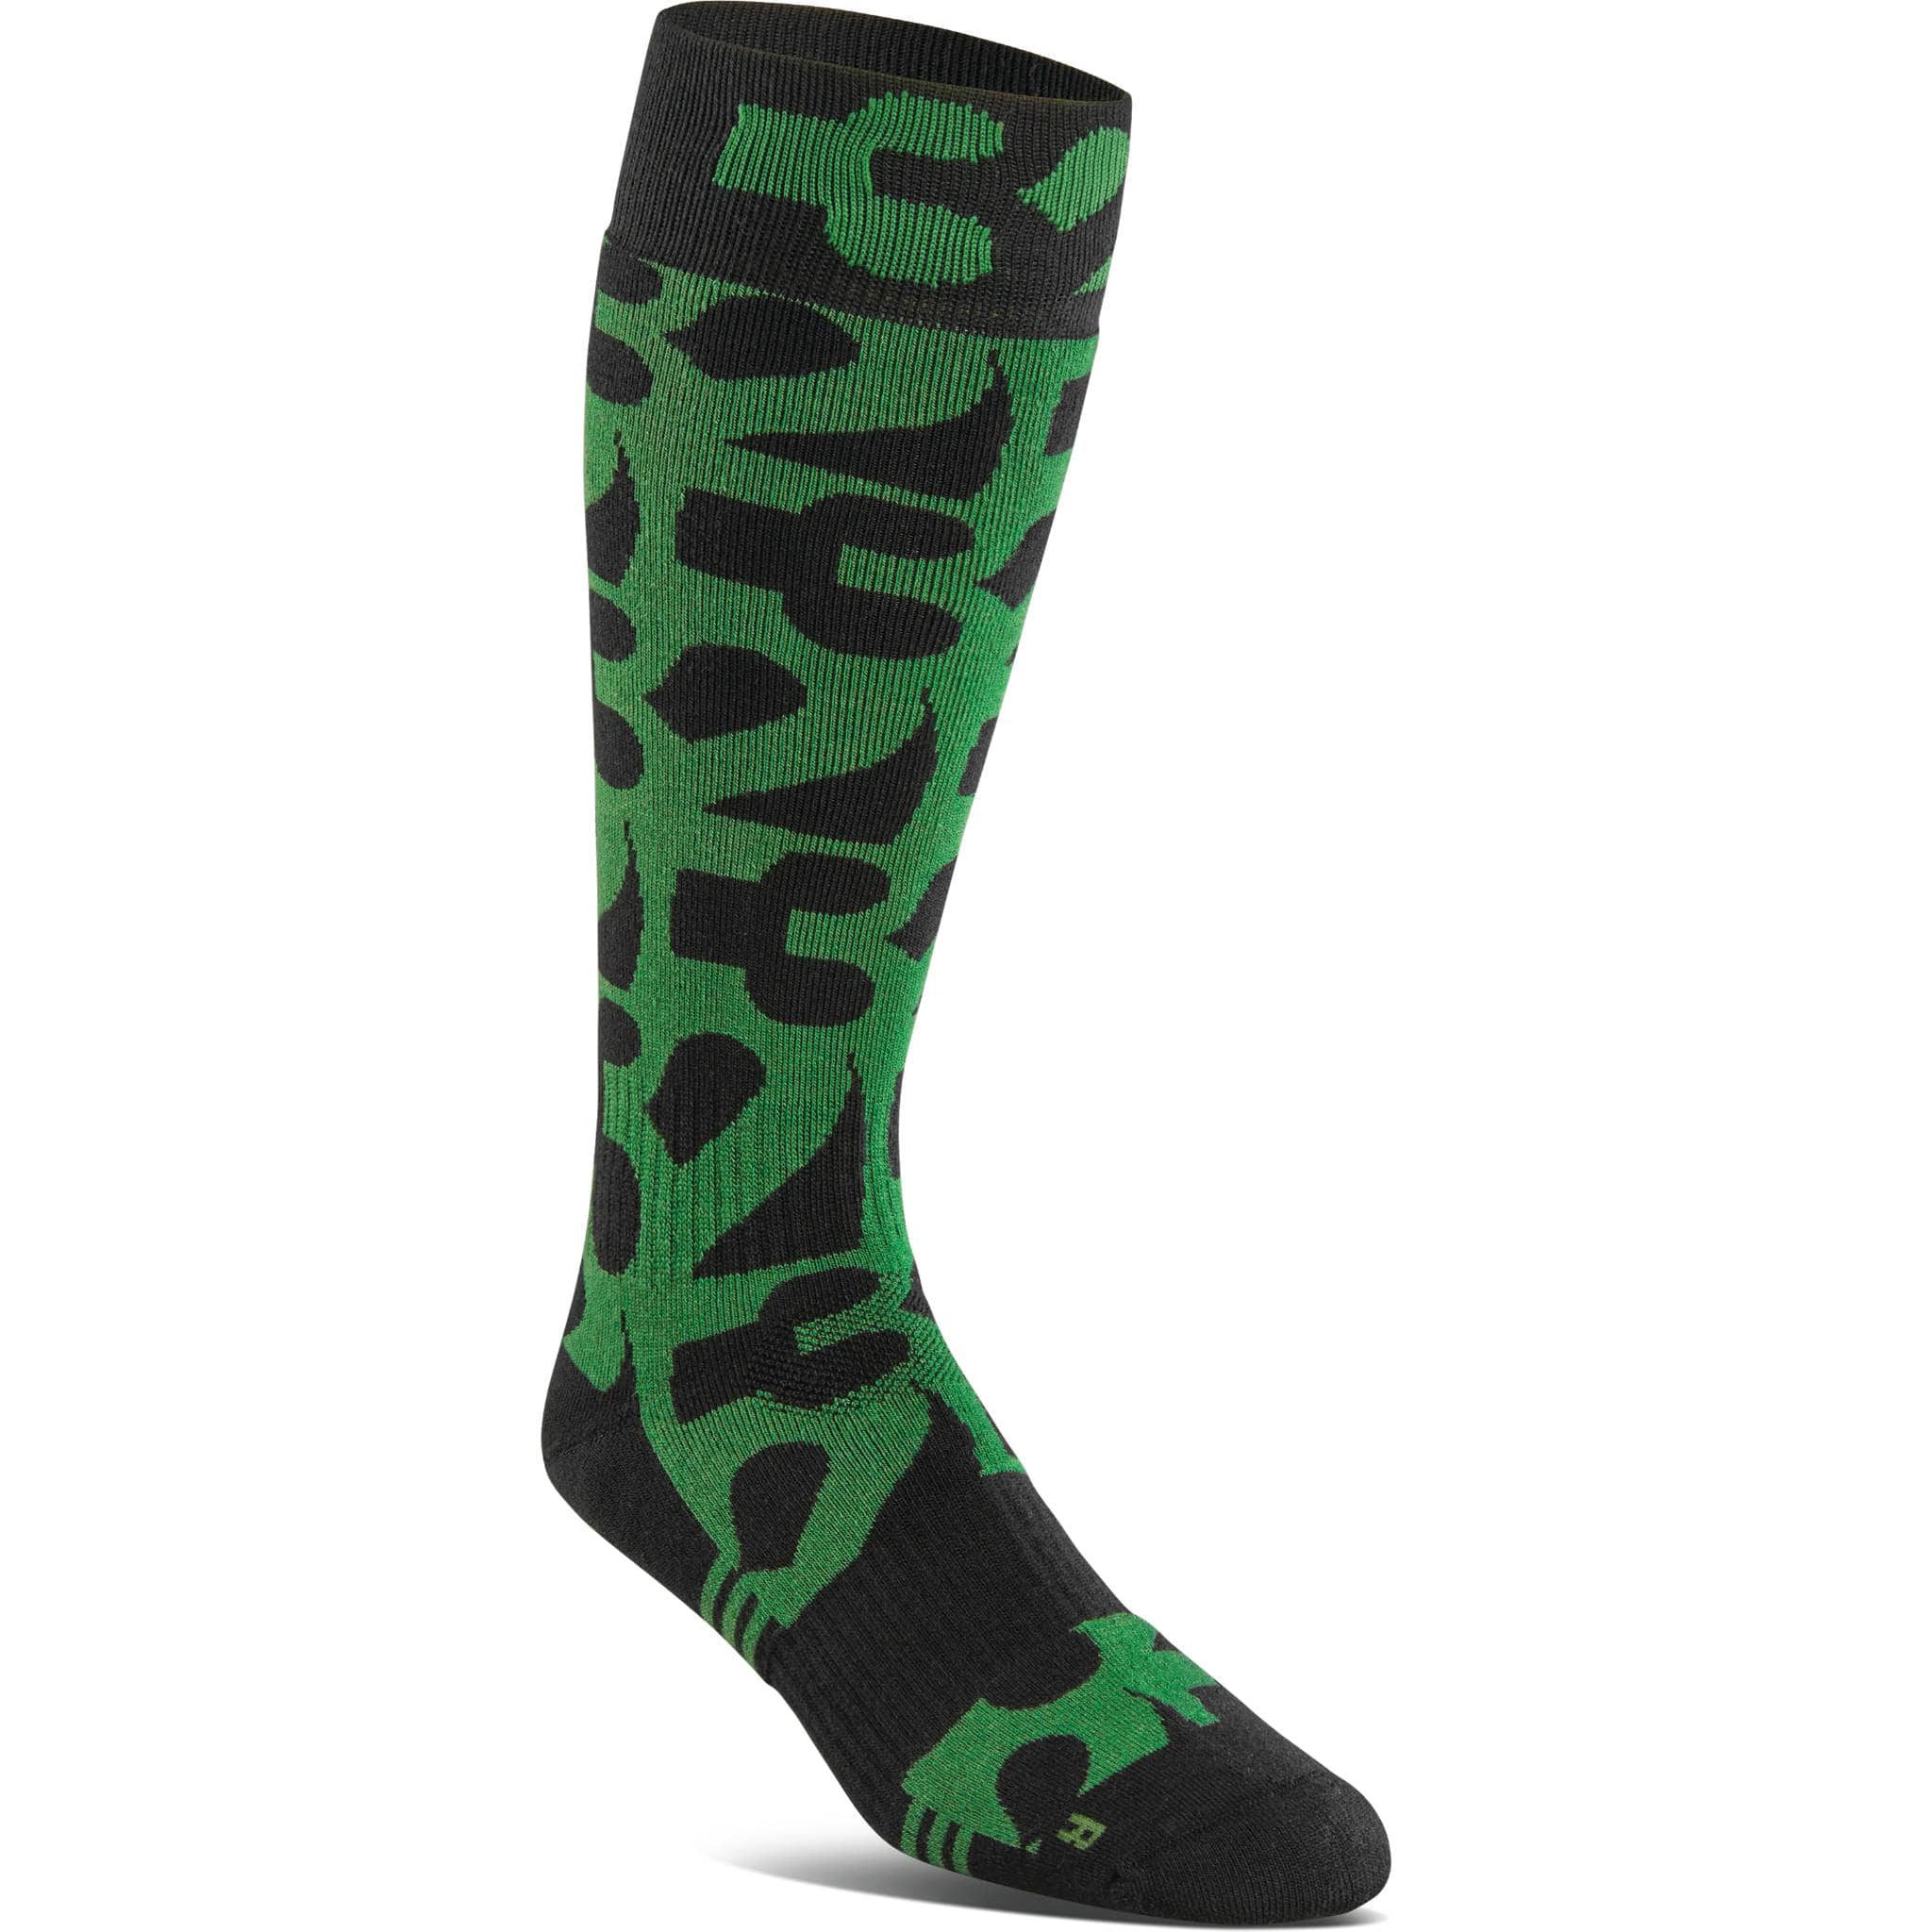 ThirtyTwo Cut Out Snowboard Socks 3-Pack